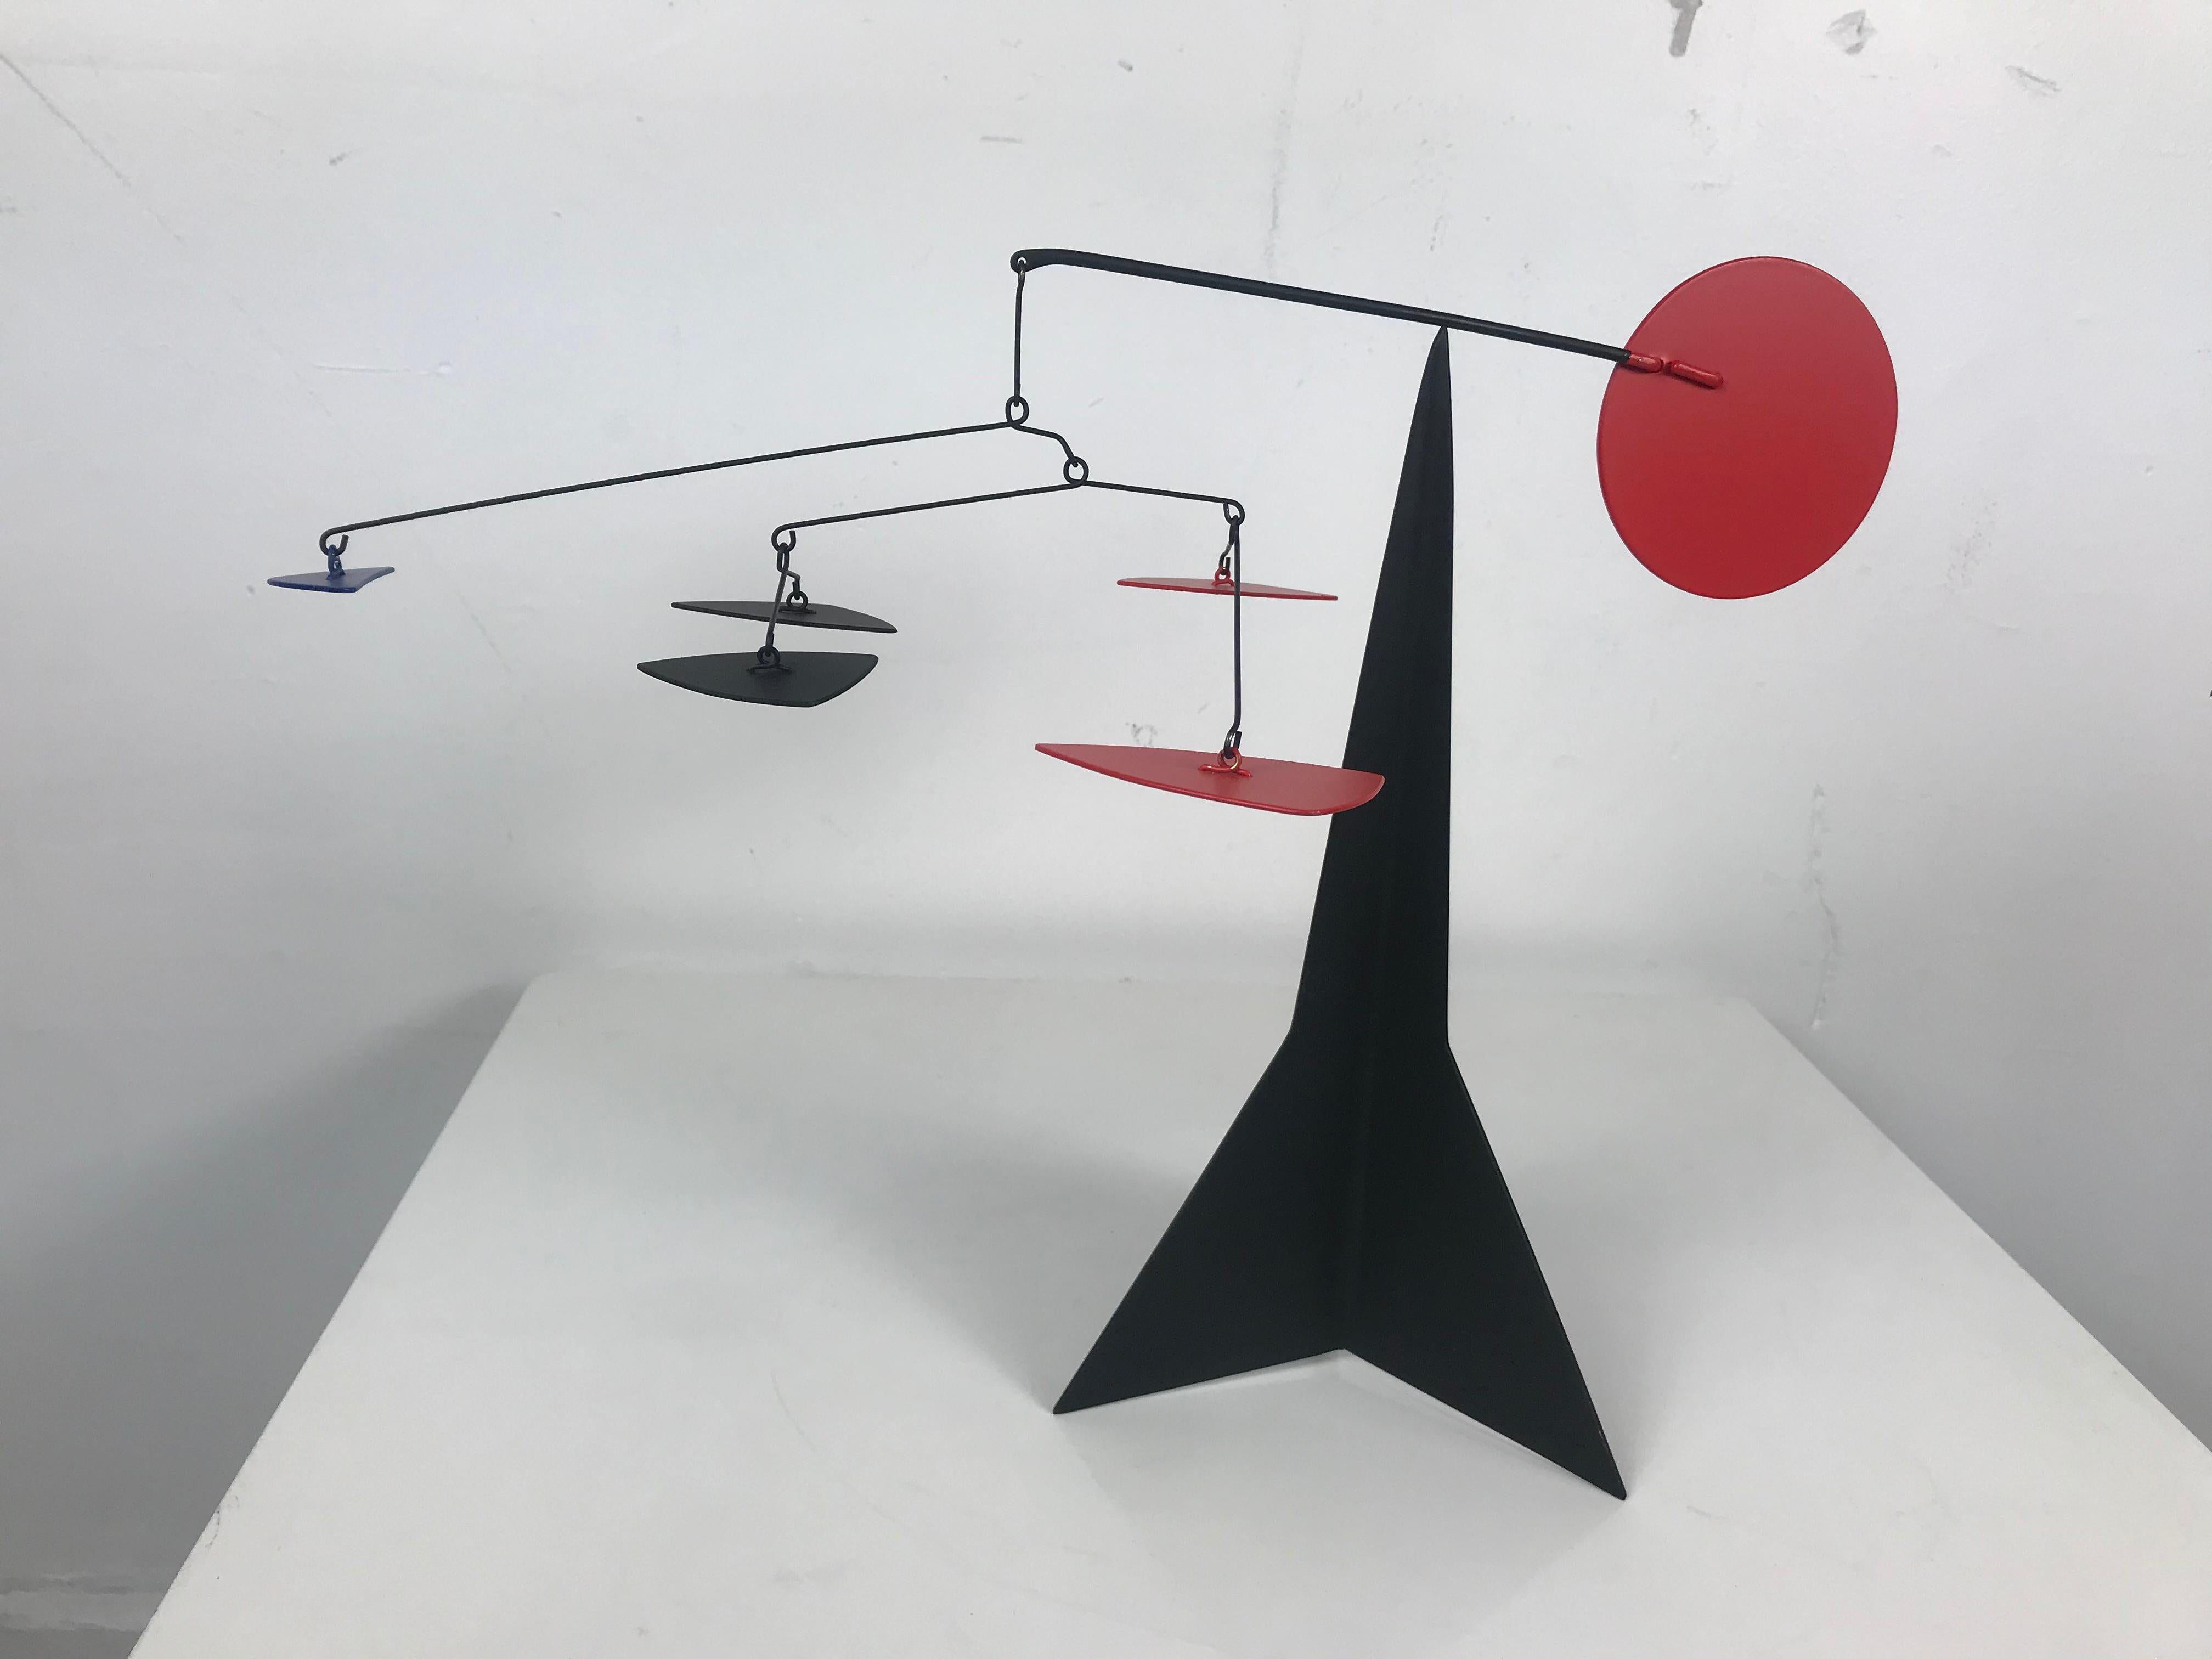 Amazing Kinetic/stabile motion sculpture hand built and designed by Graham Sears. Stunning!! Acclaimed artist Sears, born in Buffalo, NY in 1953, is an alumnus of both The Nichols School and The University of Buffalo. Following his studies in the